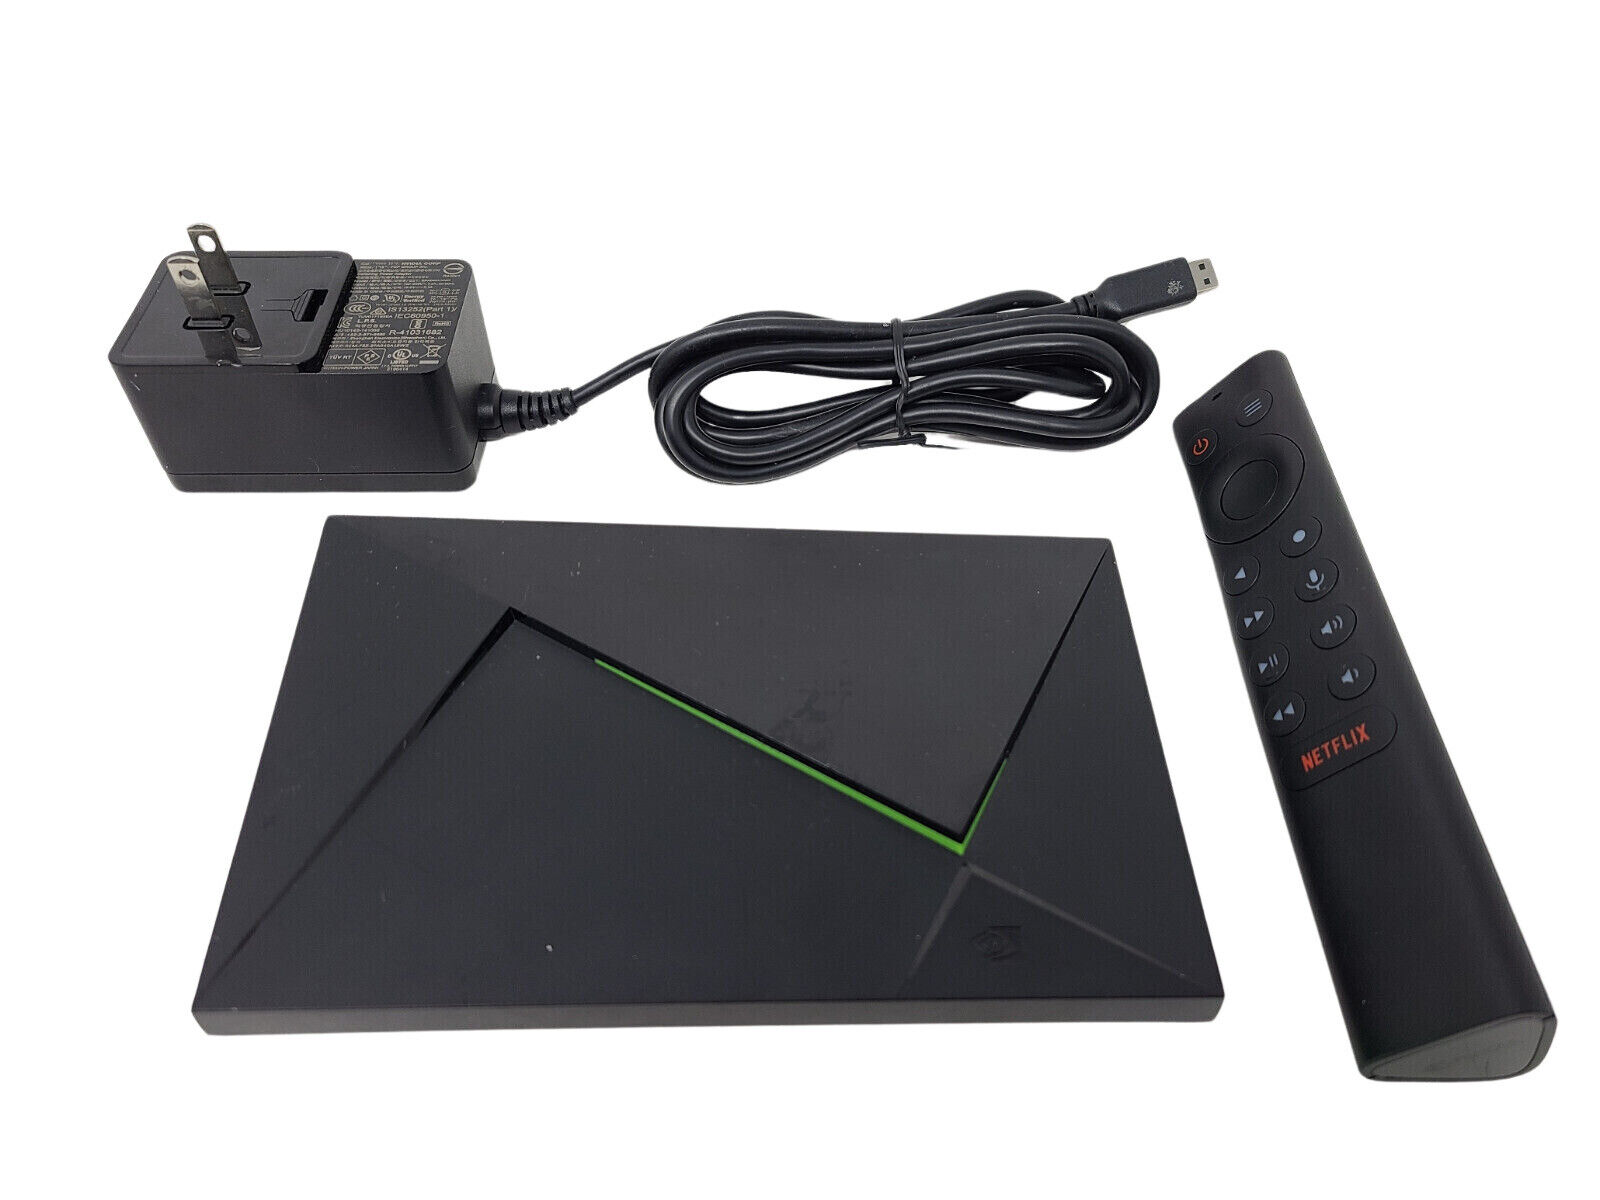 NVIDIA - SHIELD Android TV Pro - 16GB - 4K HDR Streaming Media Player-New  IN box